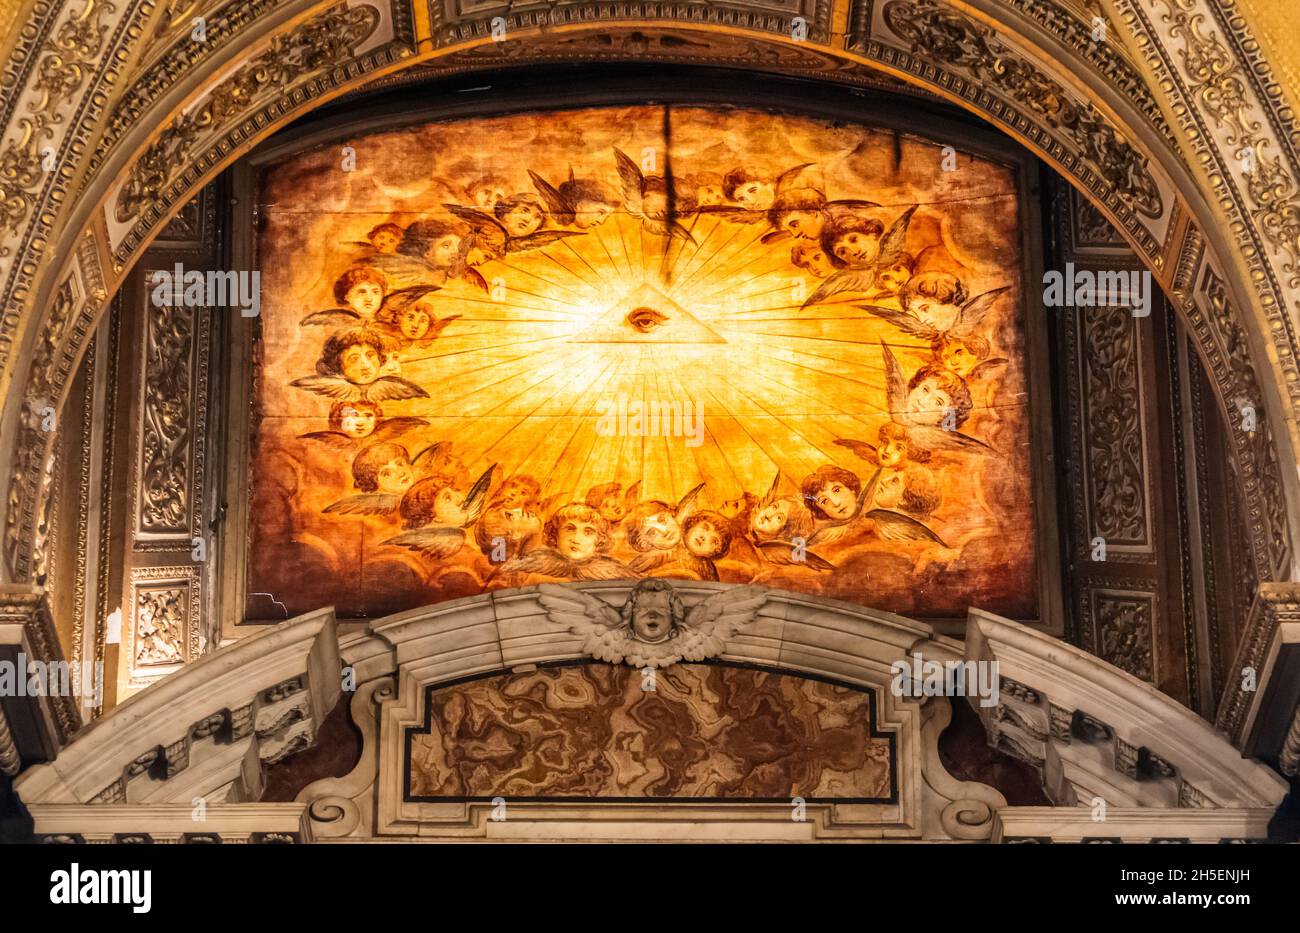 Medieval fresco decorating wall under an arch inside catholic cathedral in Rome, representing the shining eye of god surrounded by a group of angels Stock Photo